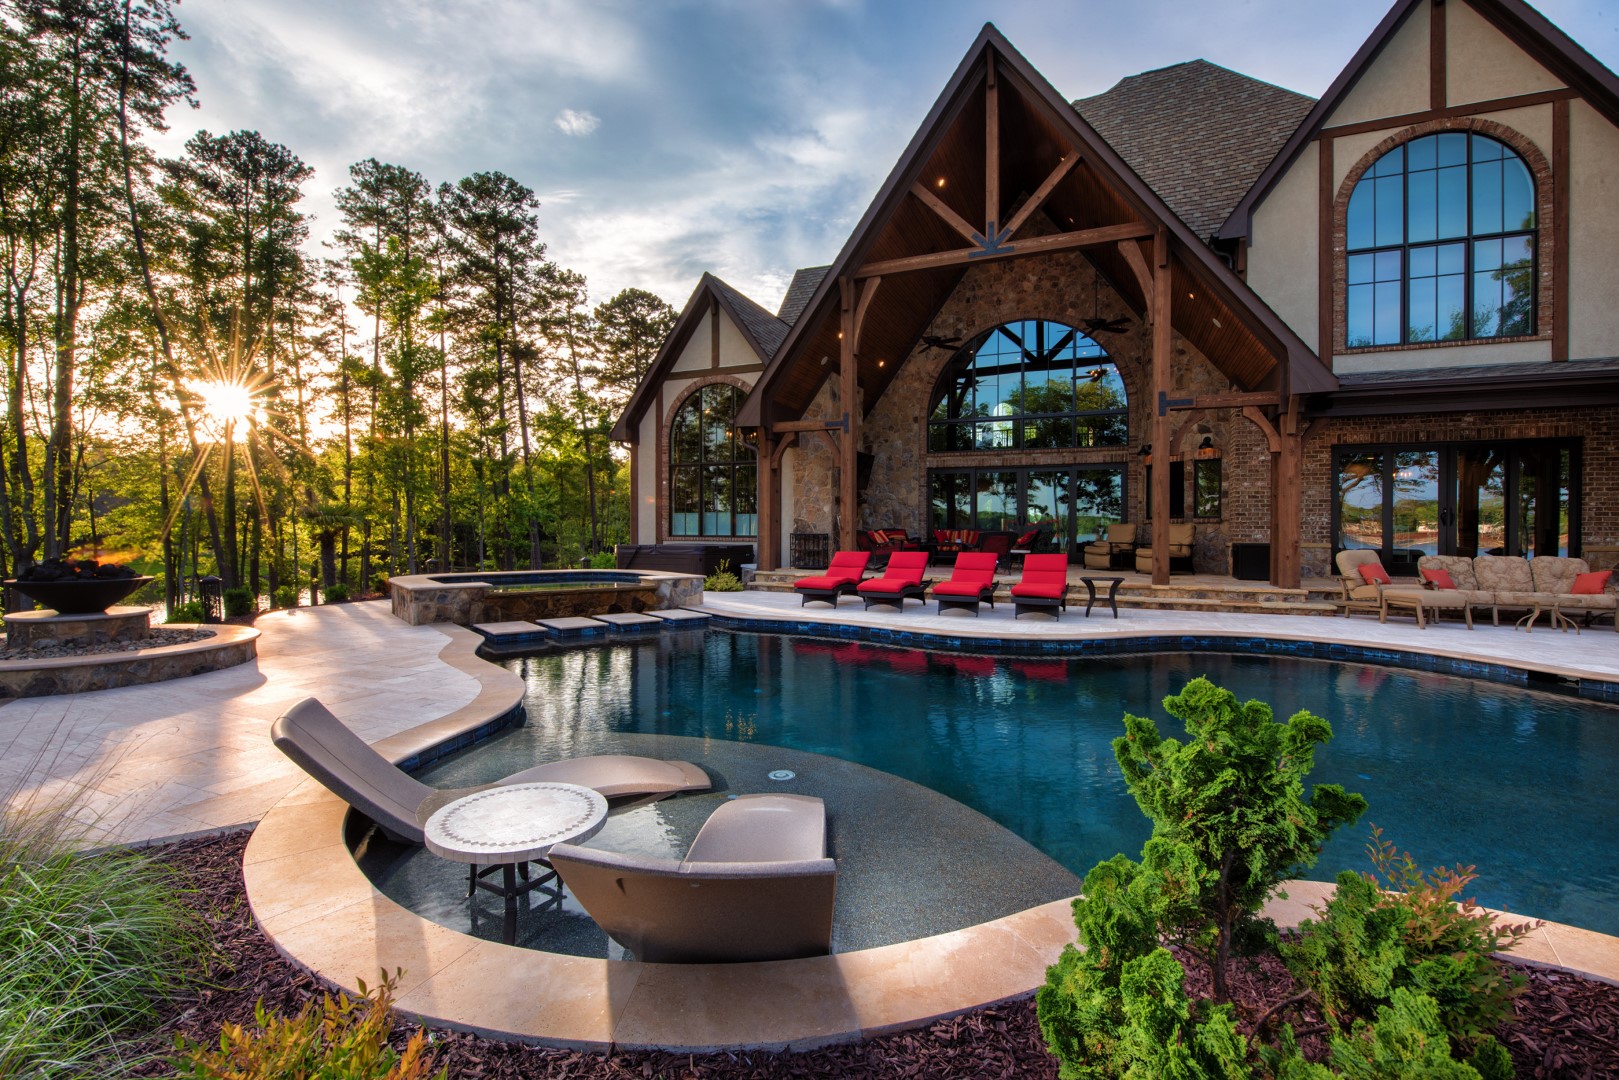 20 Jaw-dropping Rustic Swimming Pool Designs You Must See